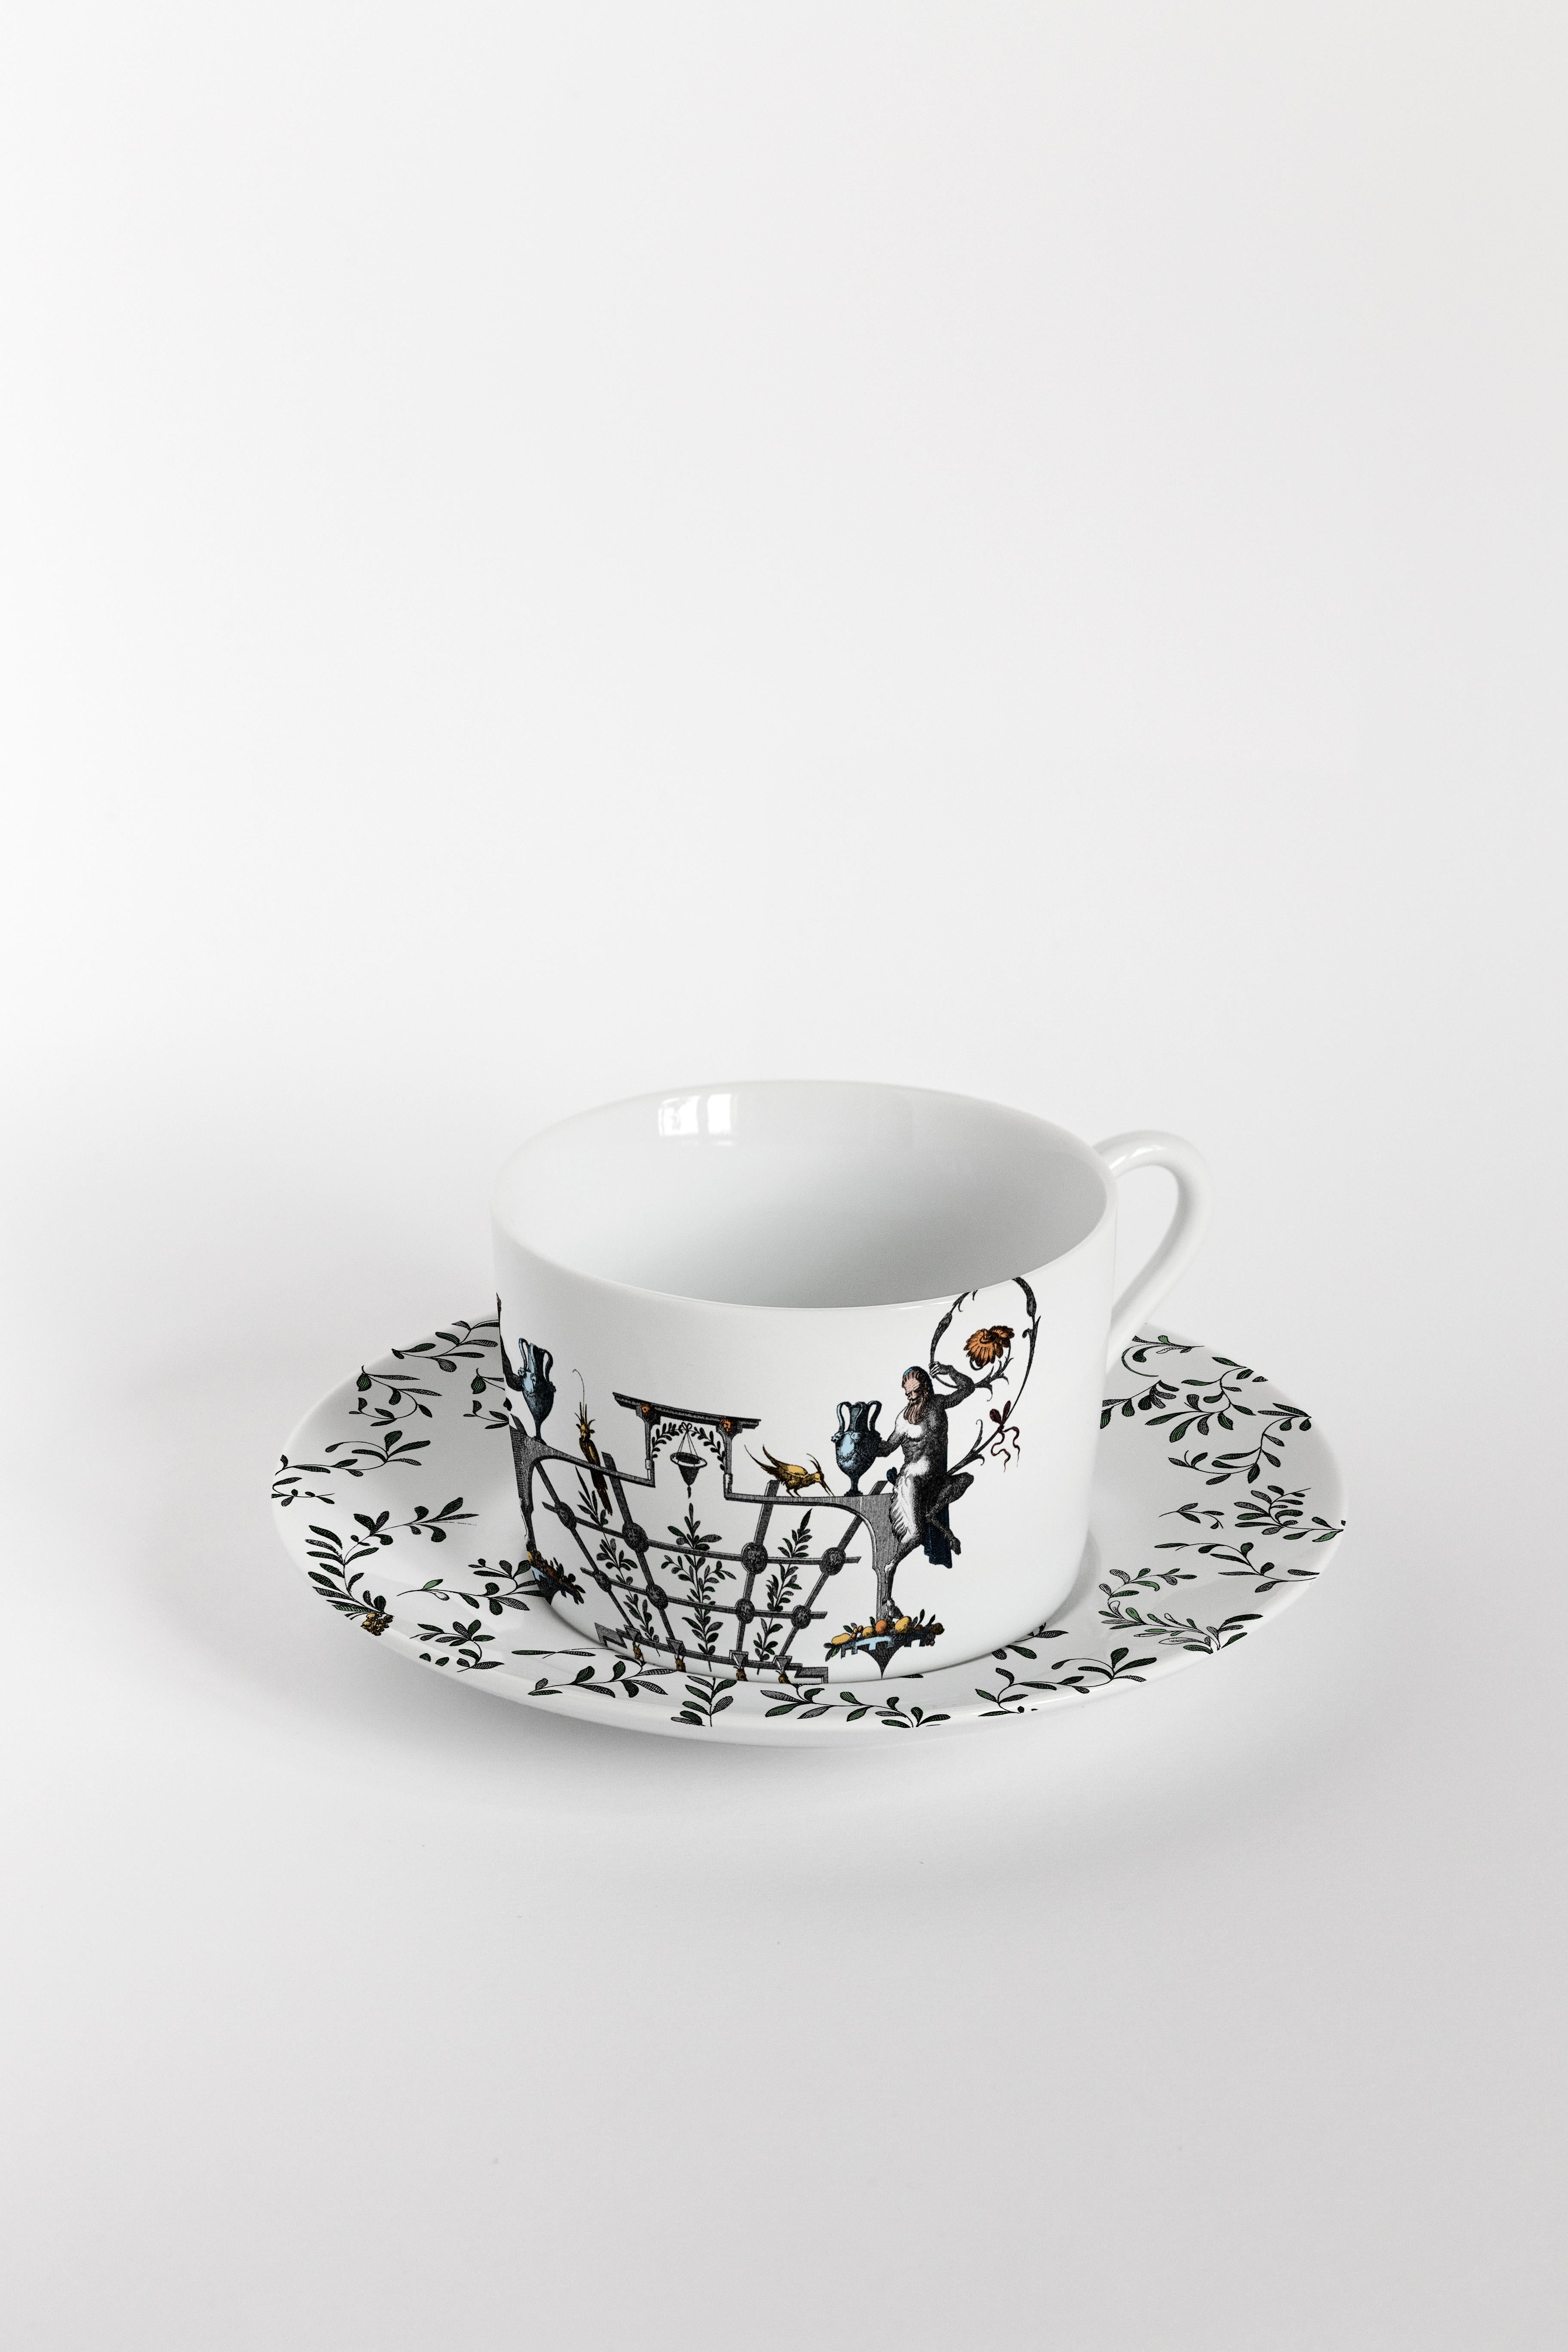 Pompei, Six Contemporary Decorated Tea Cups with Plates For Sale 2